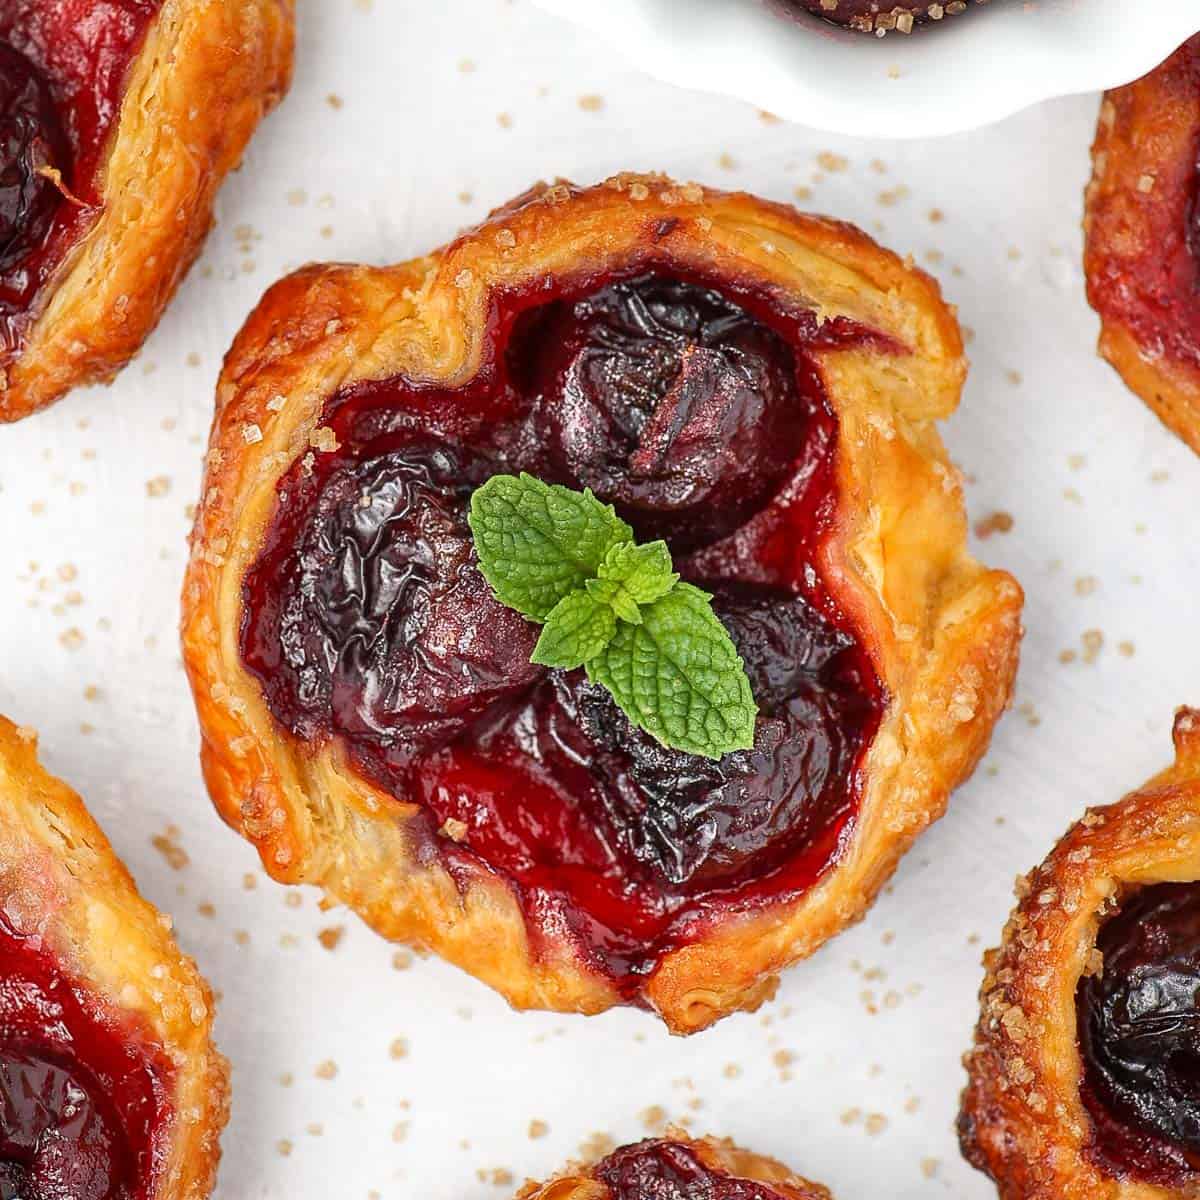 Tartlet seen from above and topped with fresh mint leaves.